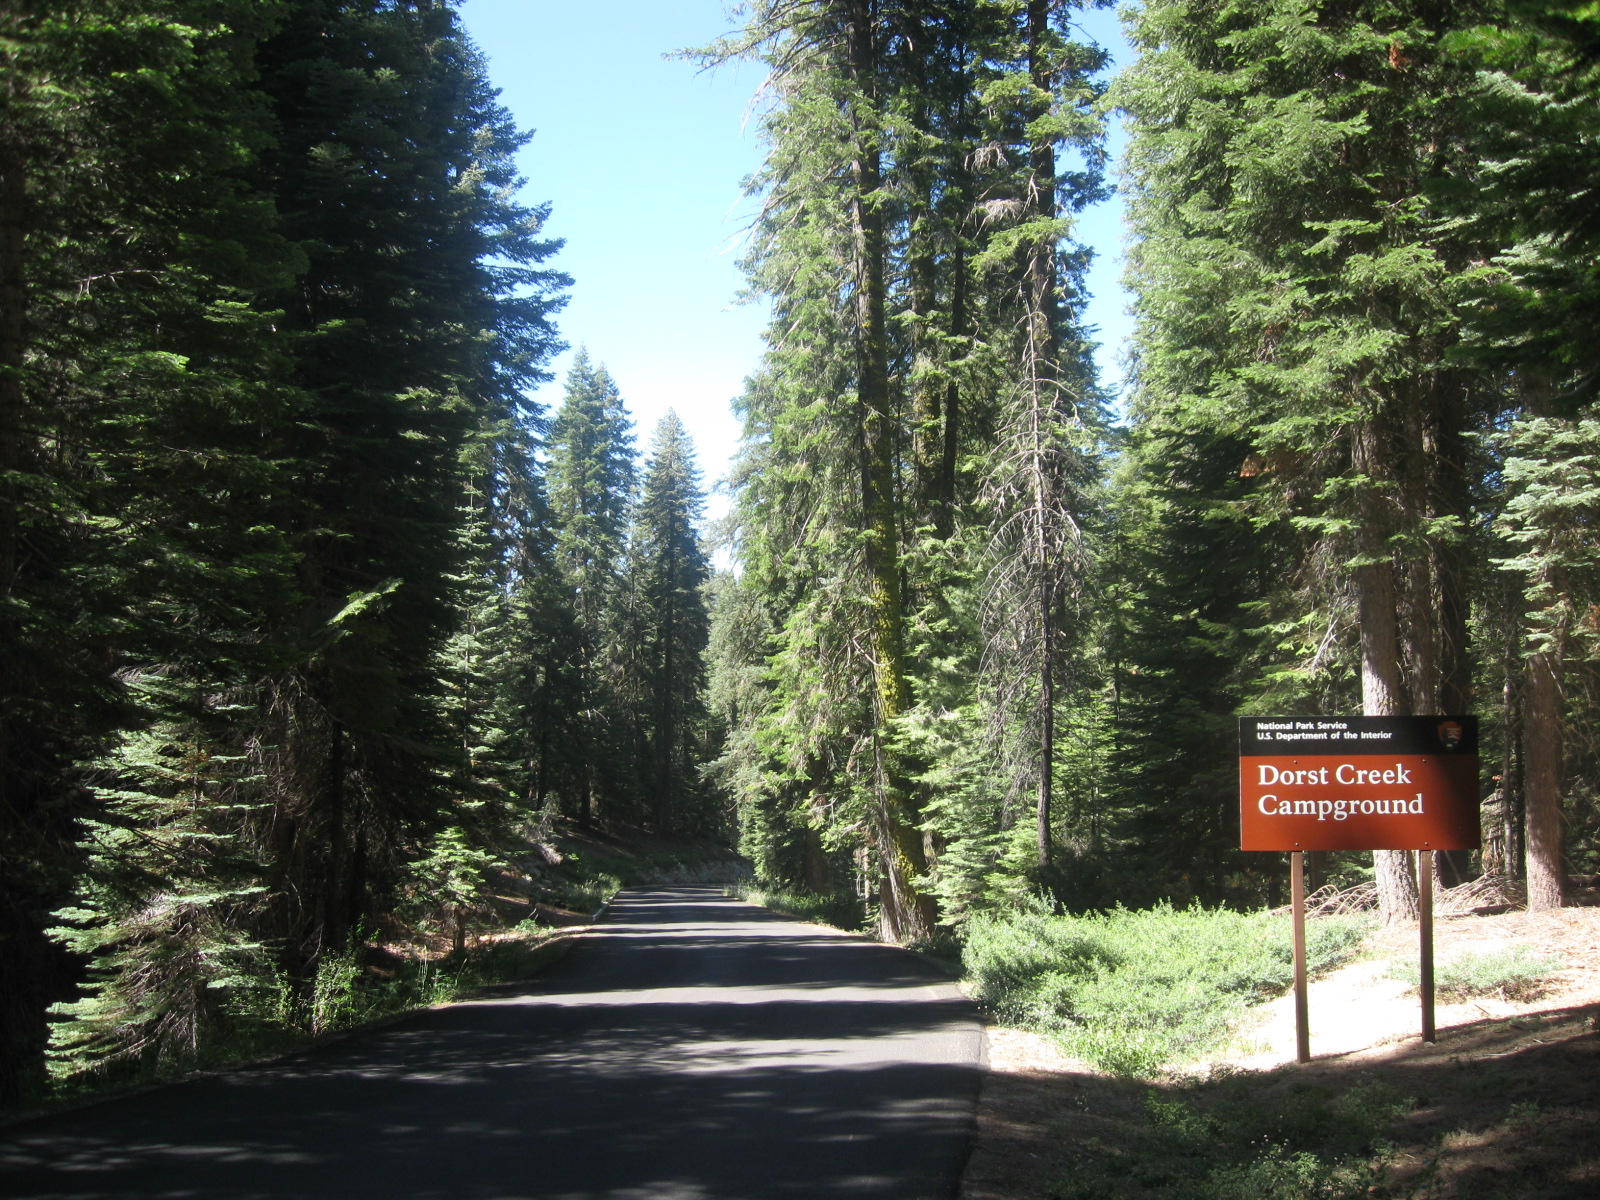 An entrance sign reading "Dorst Creek Campground" beside a road